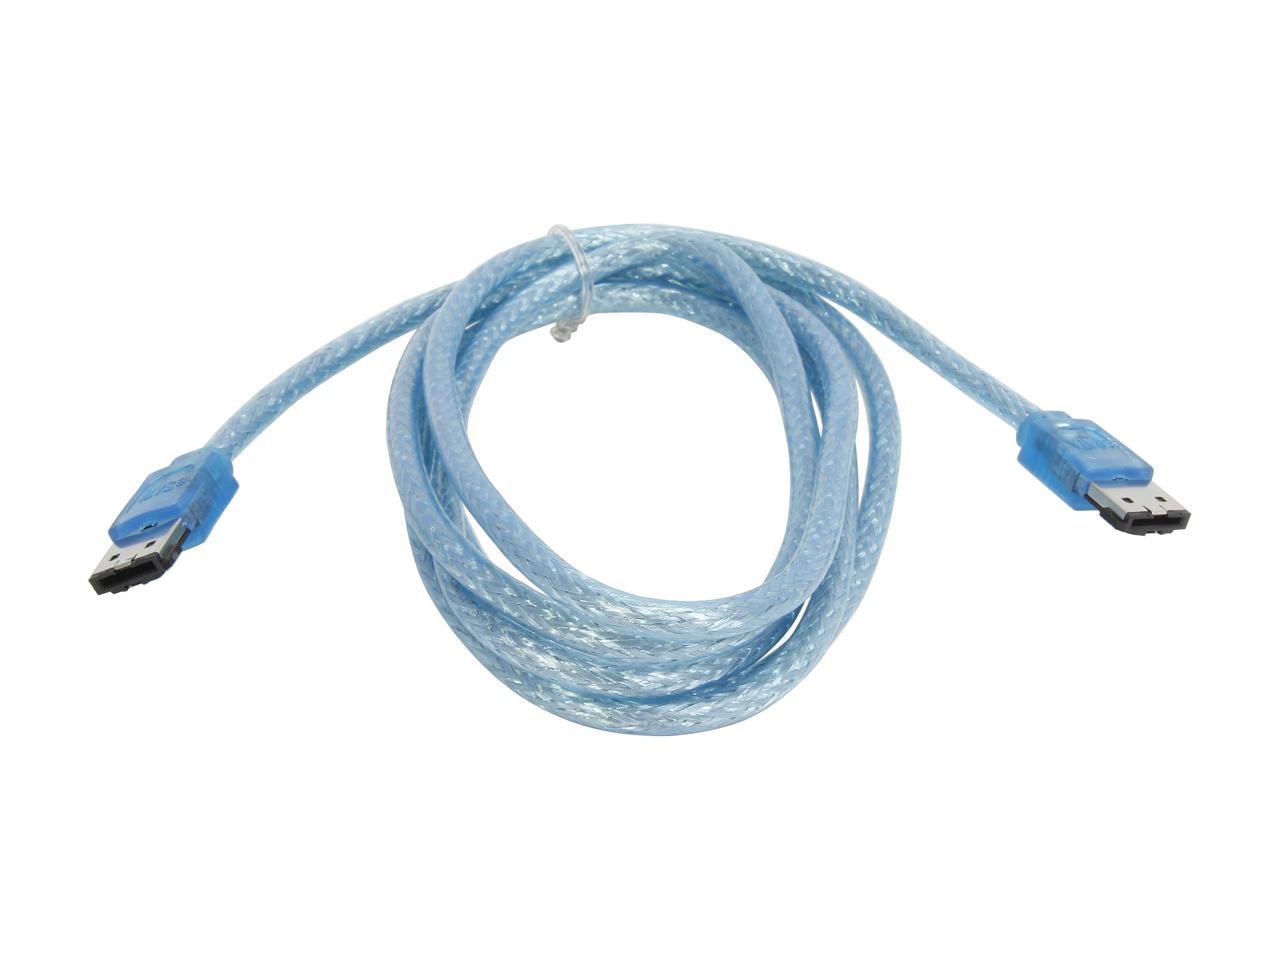 Nippon Labs ESATA3-R-6-ll-BU 6 ft. eSATA III(Type I) Male to Male Cable, Blue - image 2 of 3